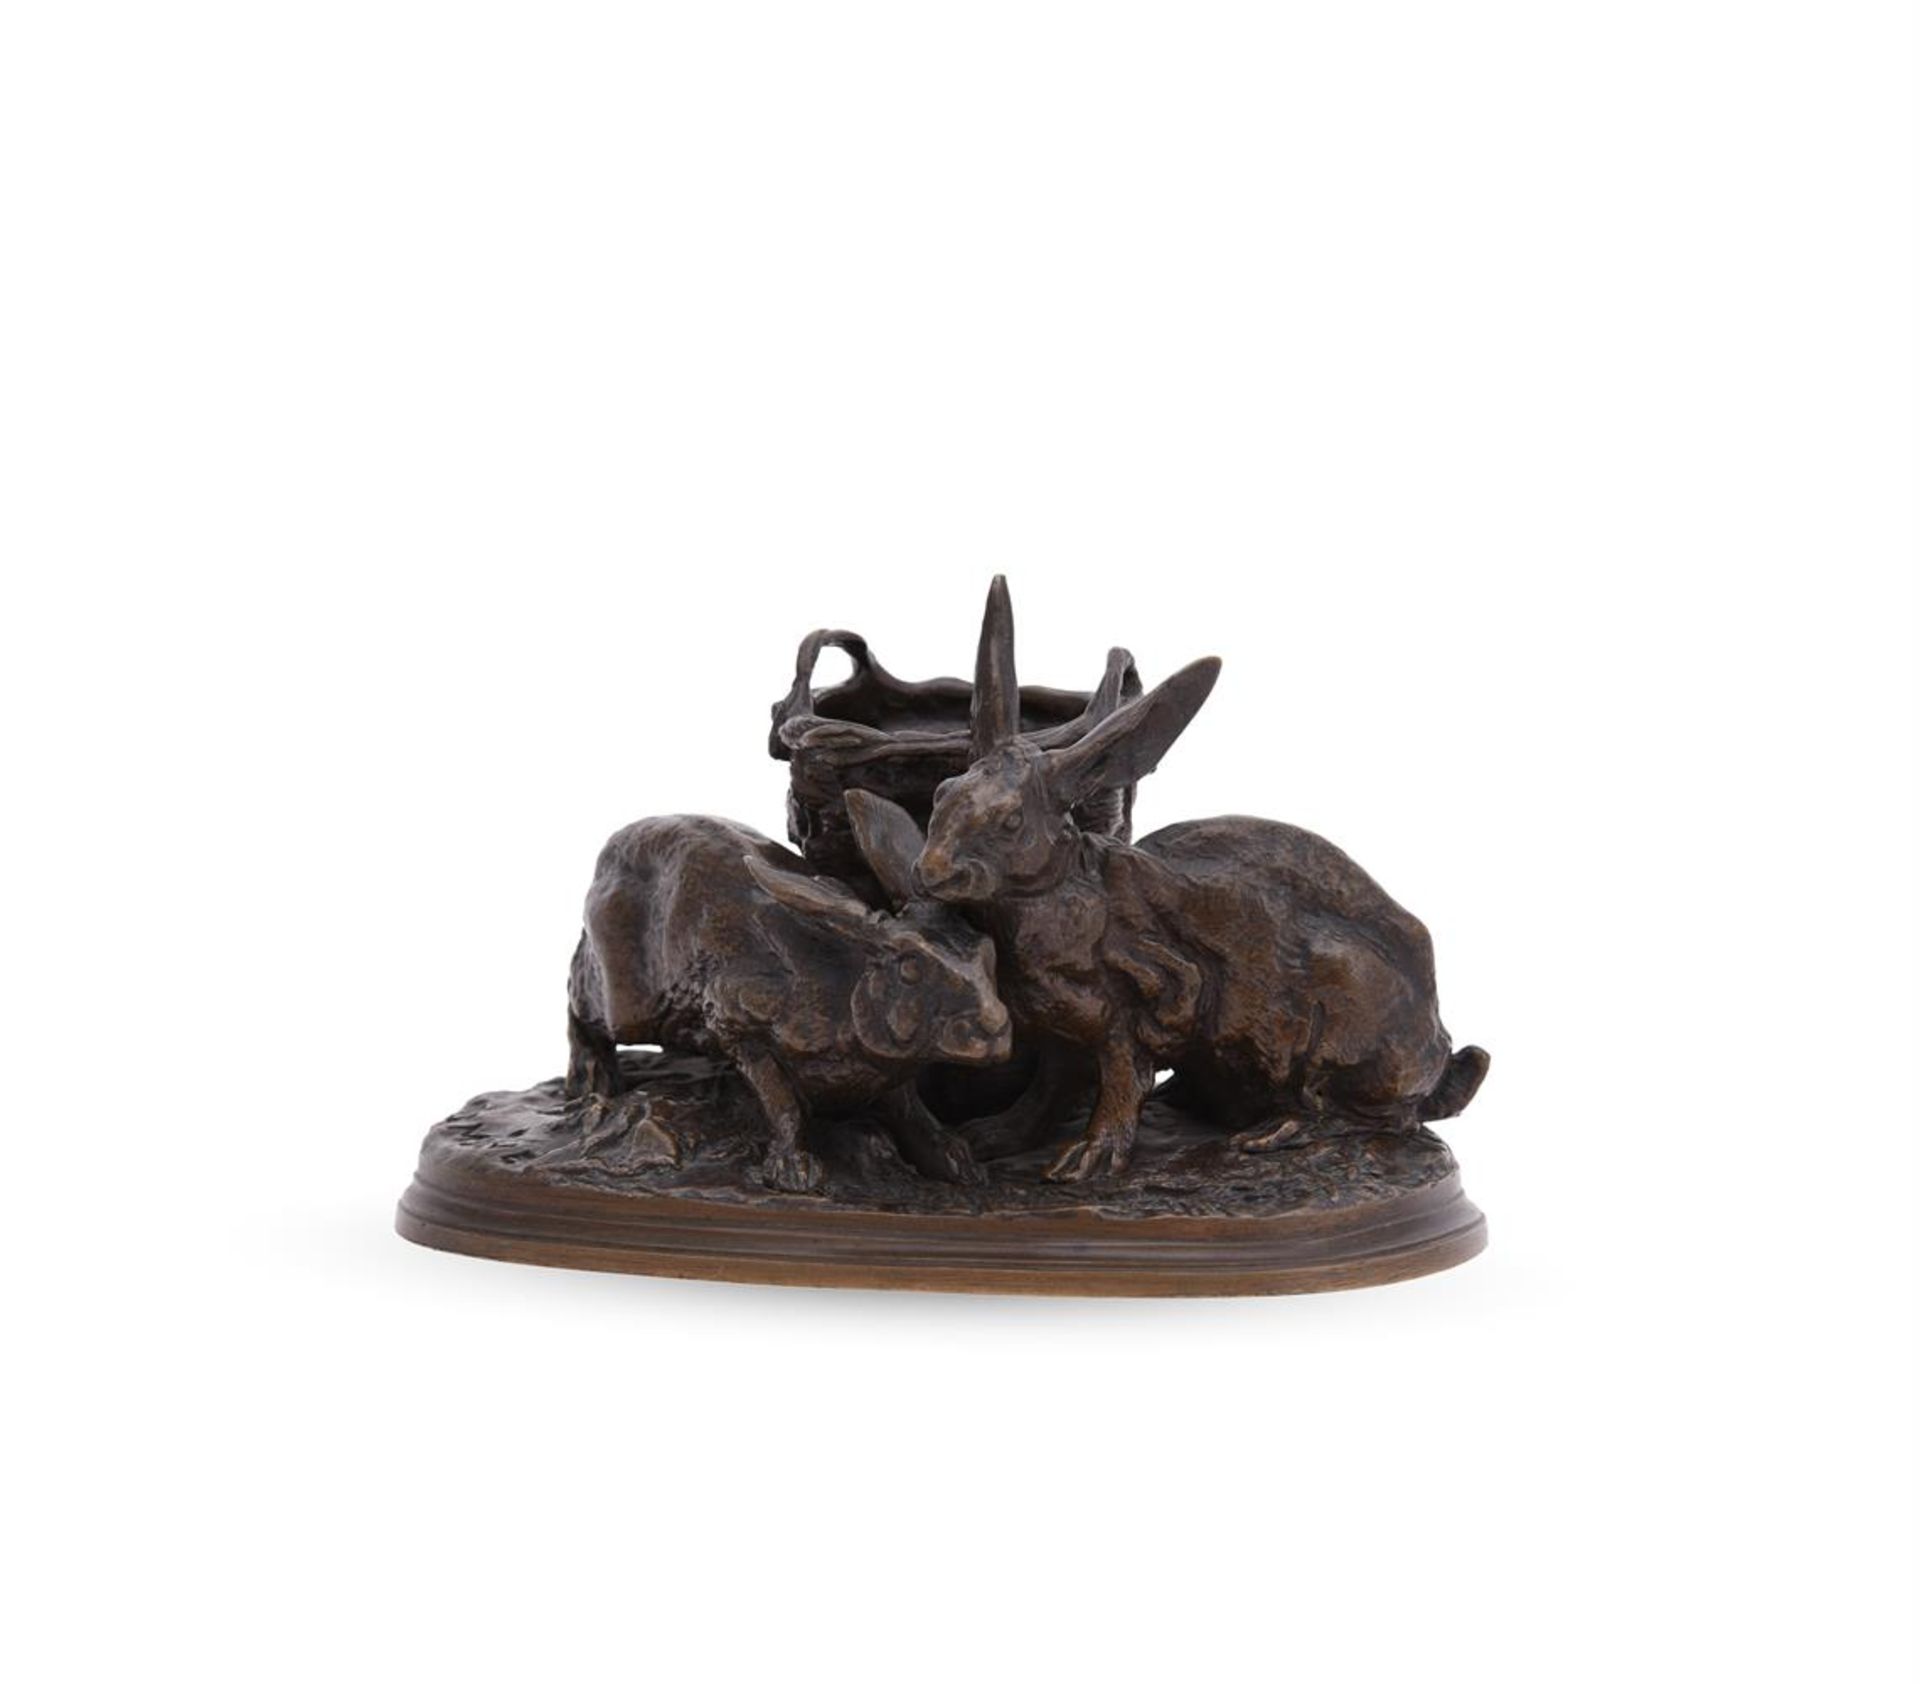 PIERRE-JULES MÊNE (FRENCH, 1810-1879), A BRONZE MODEL OF A PAIR OF RABBITS